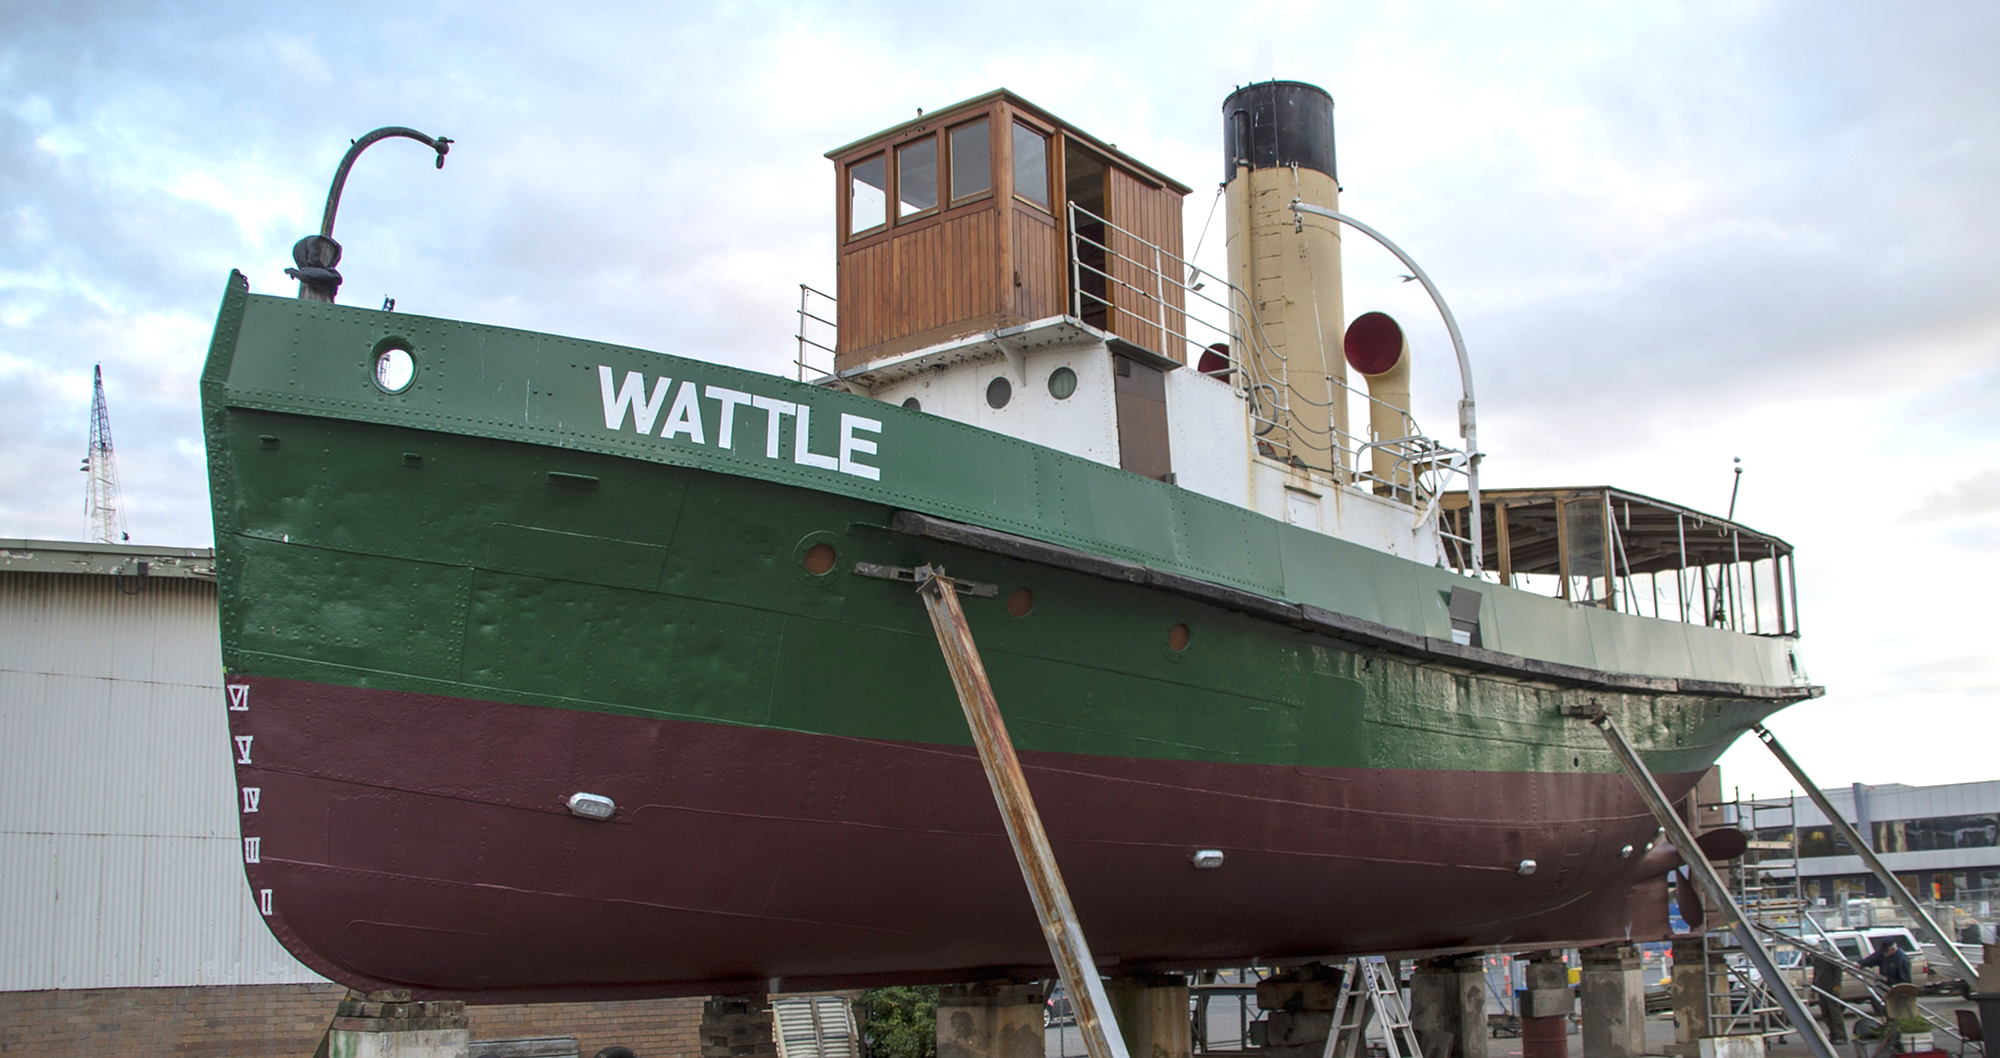 Hull restored, ready for launch, 29 September 2015, Jeff Malley